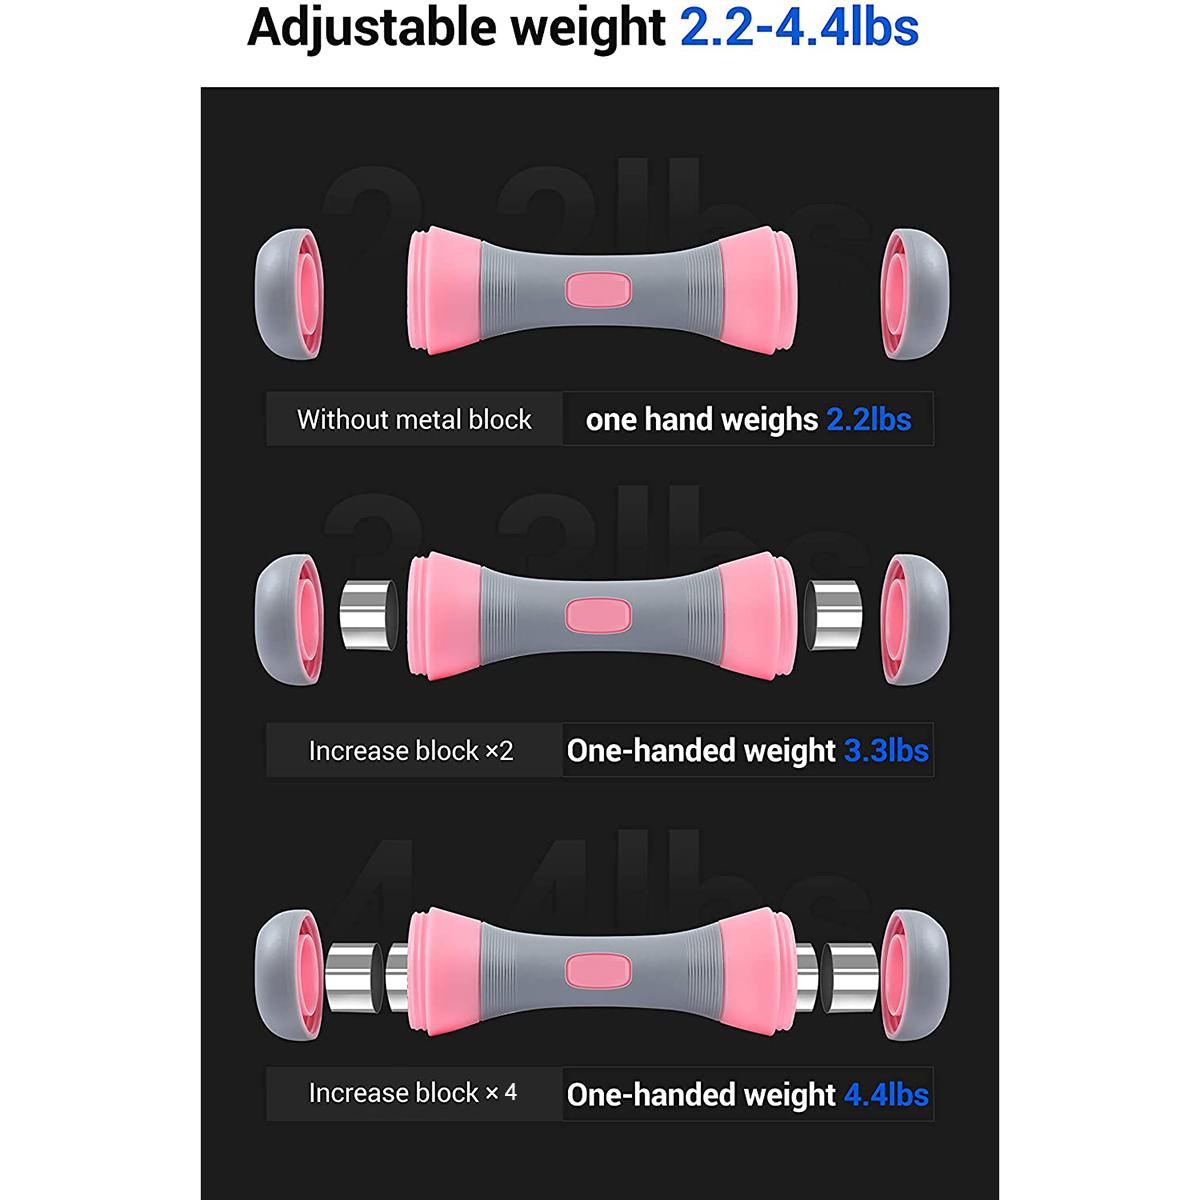 4KG 4.4lbs Women Dumbbell Barbell Adjustable Weight Dumbbells Home Gym Workout Exercise Training Fitness Device AU/US Dropship - adamshealthstore